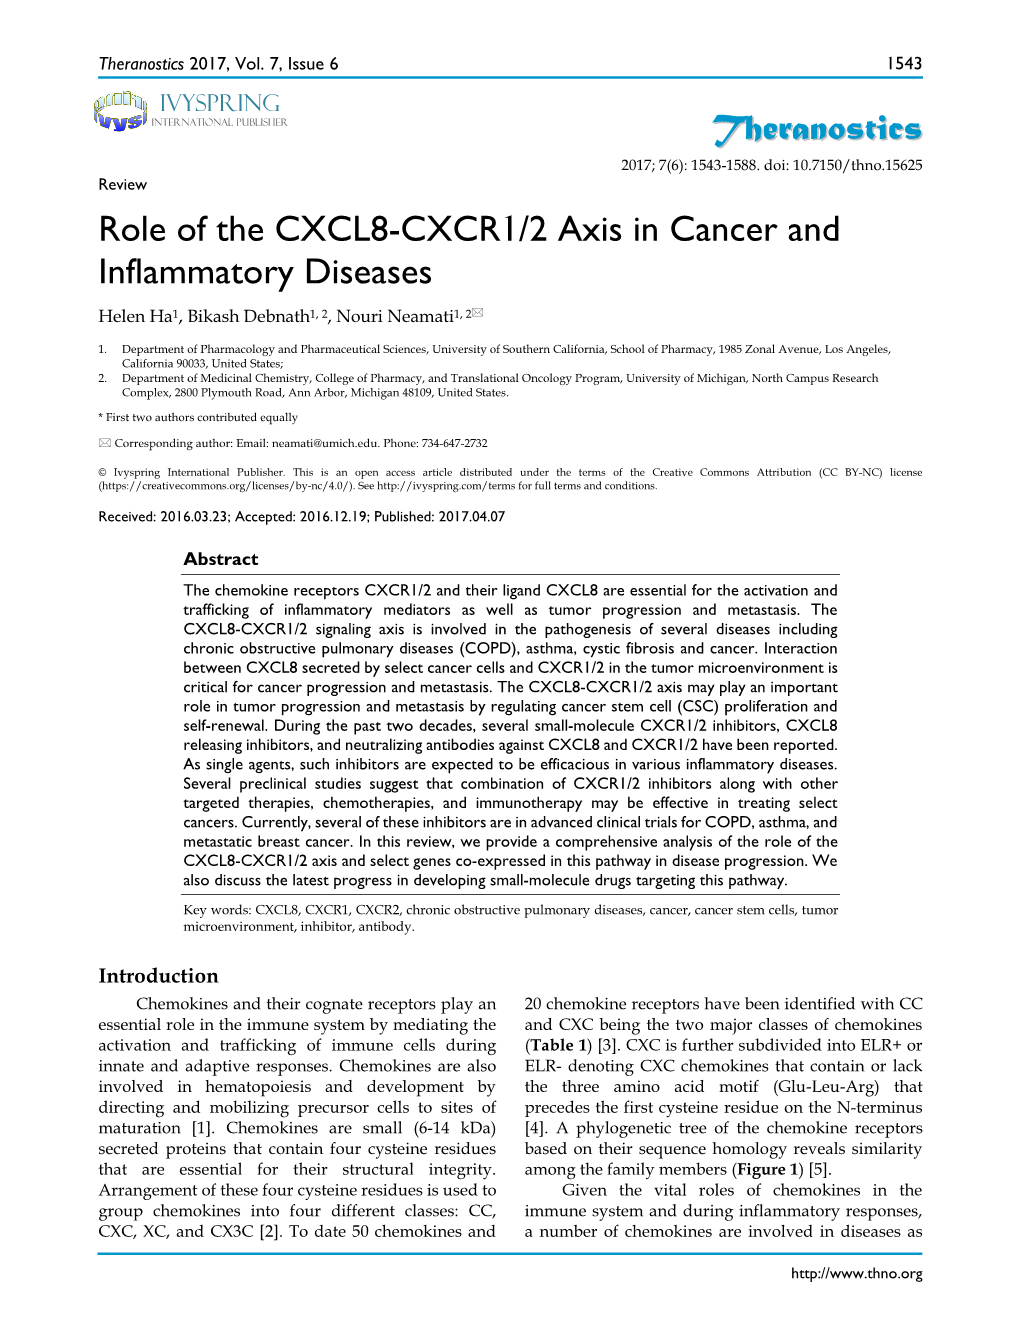 Theranostics Role of the CXCL8-CXCR1/2 Axis in Cancer and Inflammatory Diseases